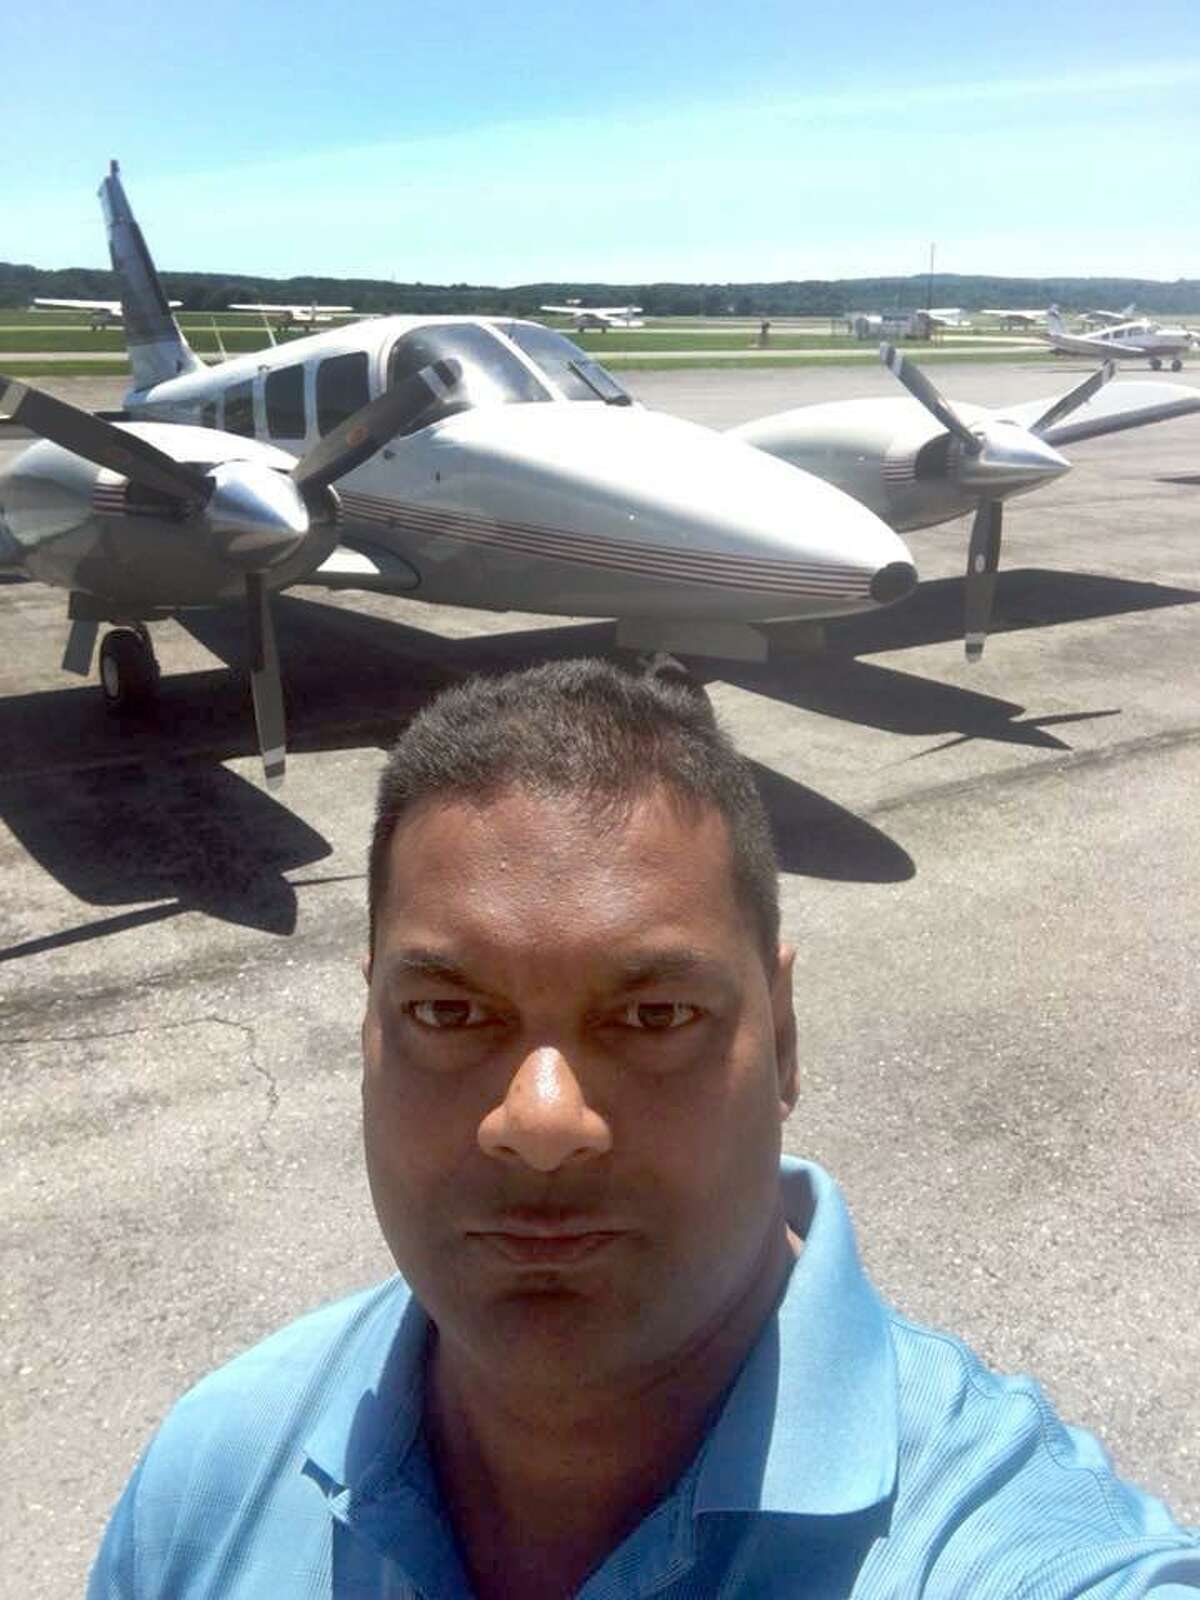 Authorities have identified 41-year-old Munidat “Raj” Persaud of Waterbury as the owner and pilot of the Piper twin turbo prop airplane that crashed about three miles southeast of Francis S. Gabreski Airport in Westhampton Beach, N.Y. on Saturday.